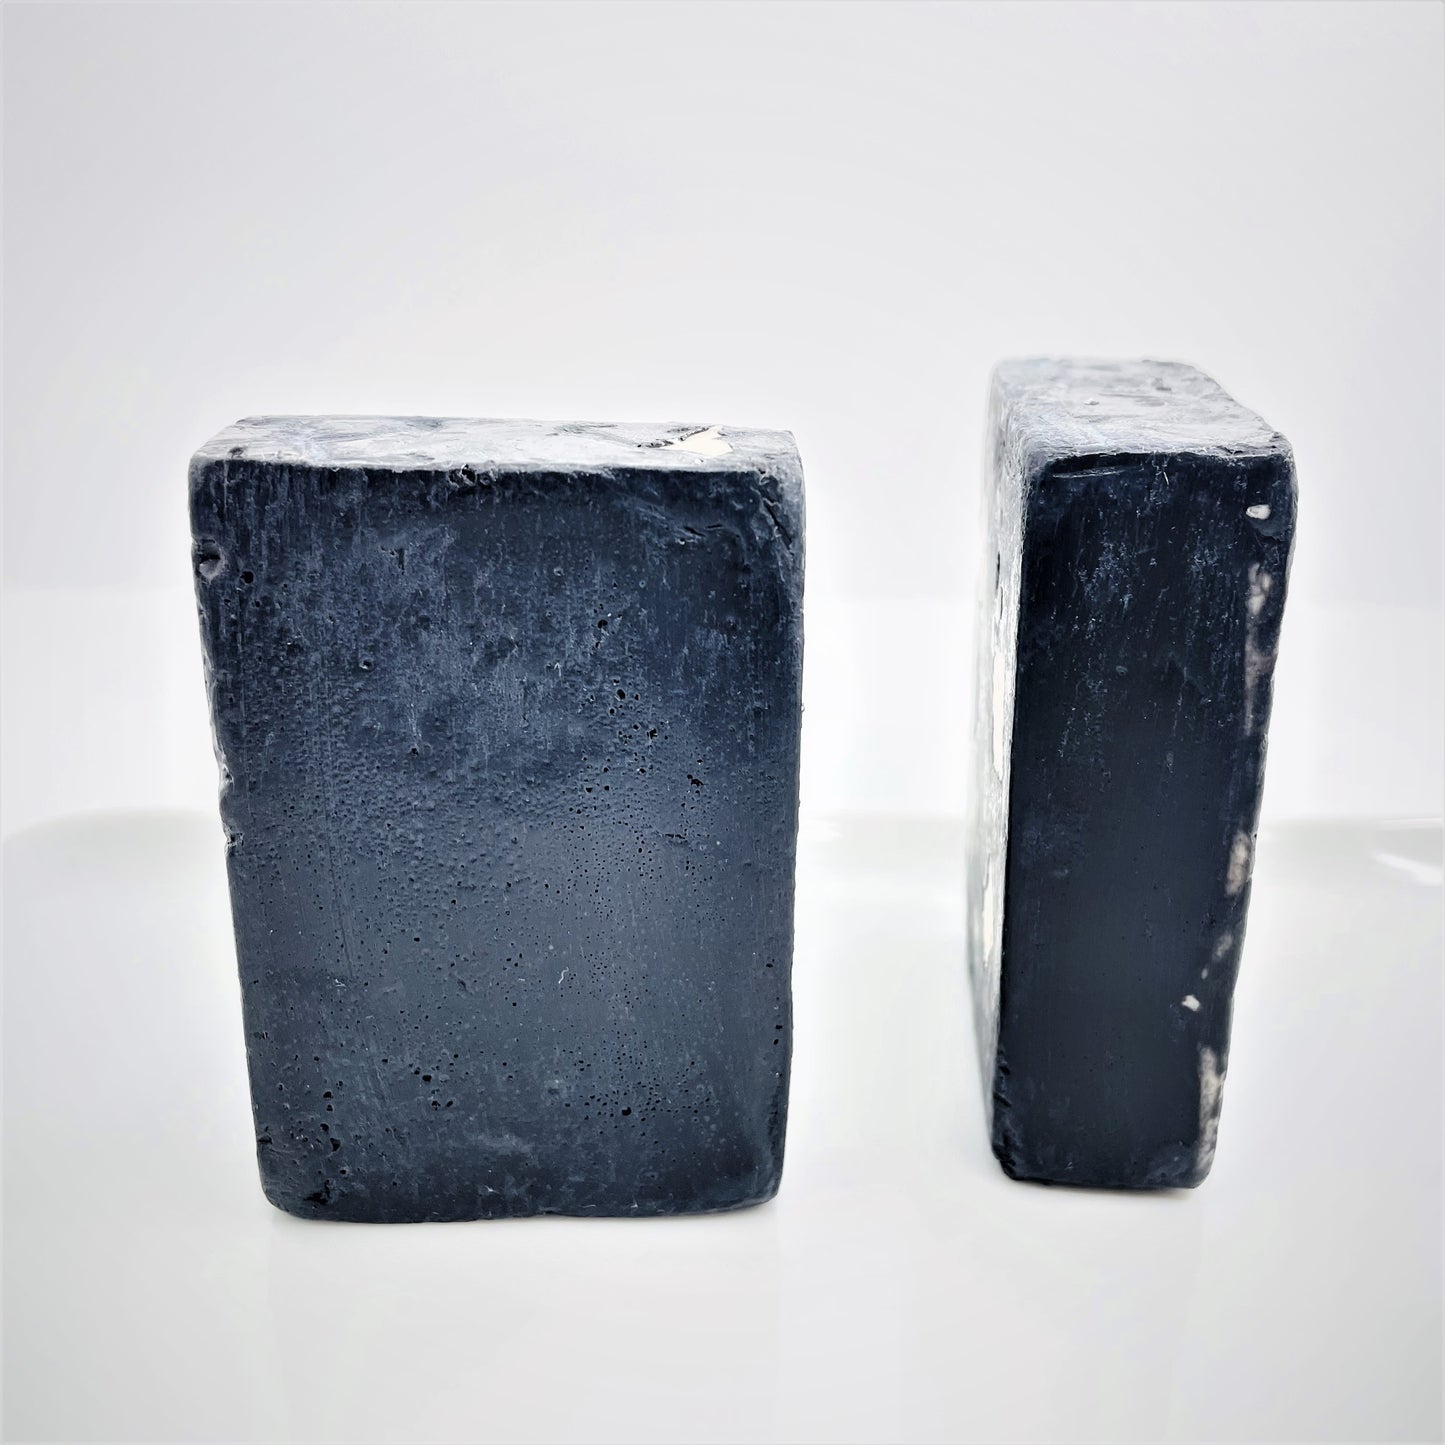 Activated Charcoal with Tea Tree Oil Handmade Natural Soap Bar